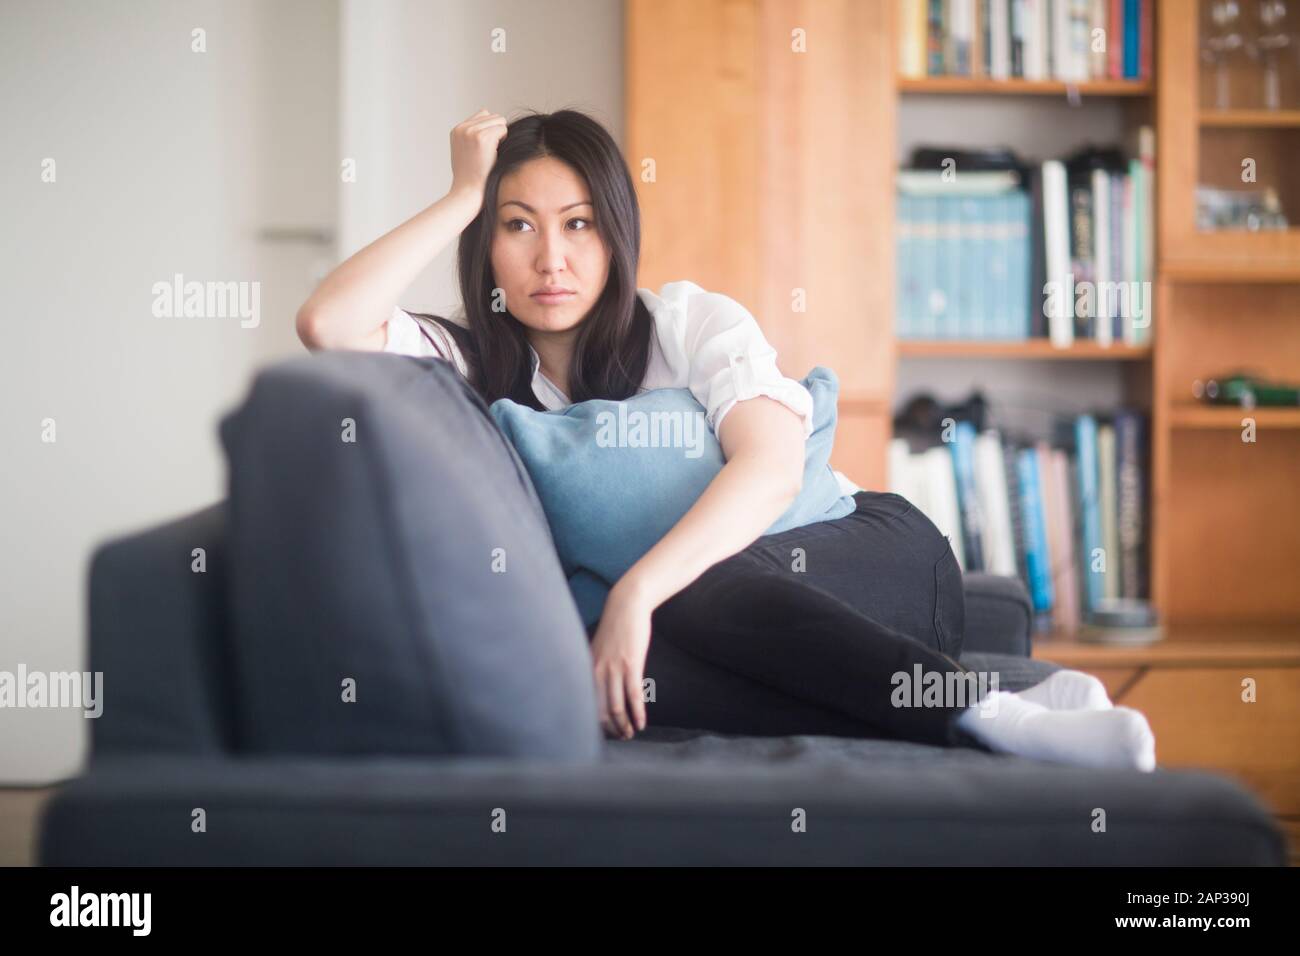 young woman at home in a living room lying on a couch revised Stock Photo